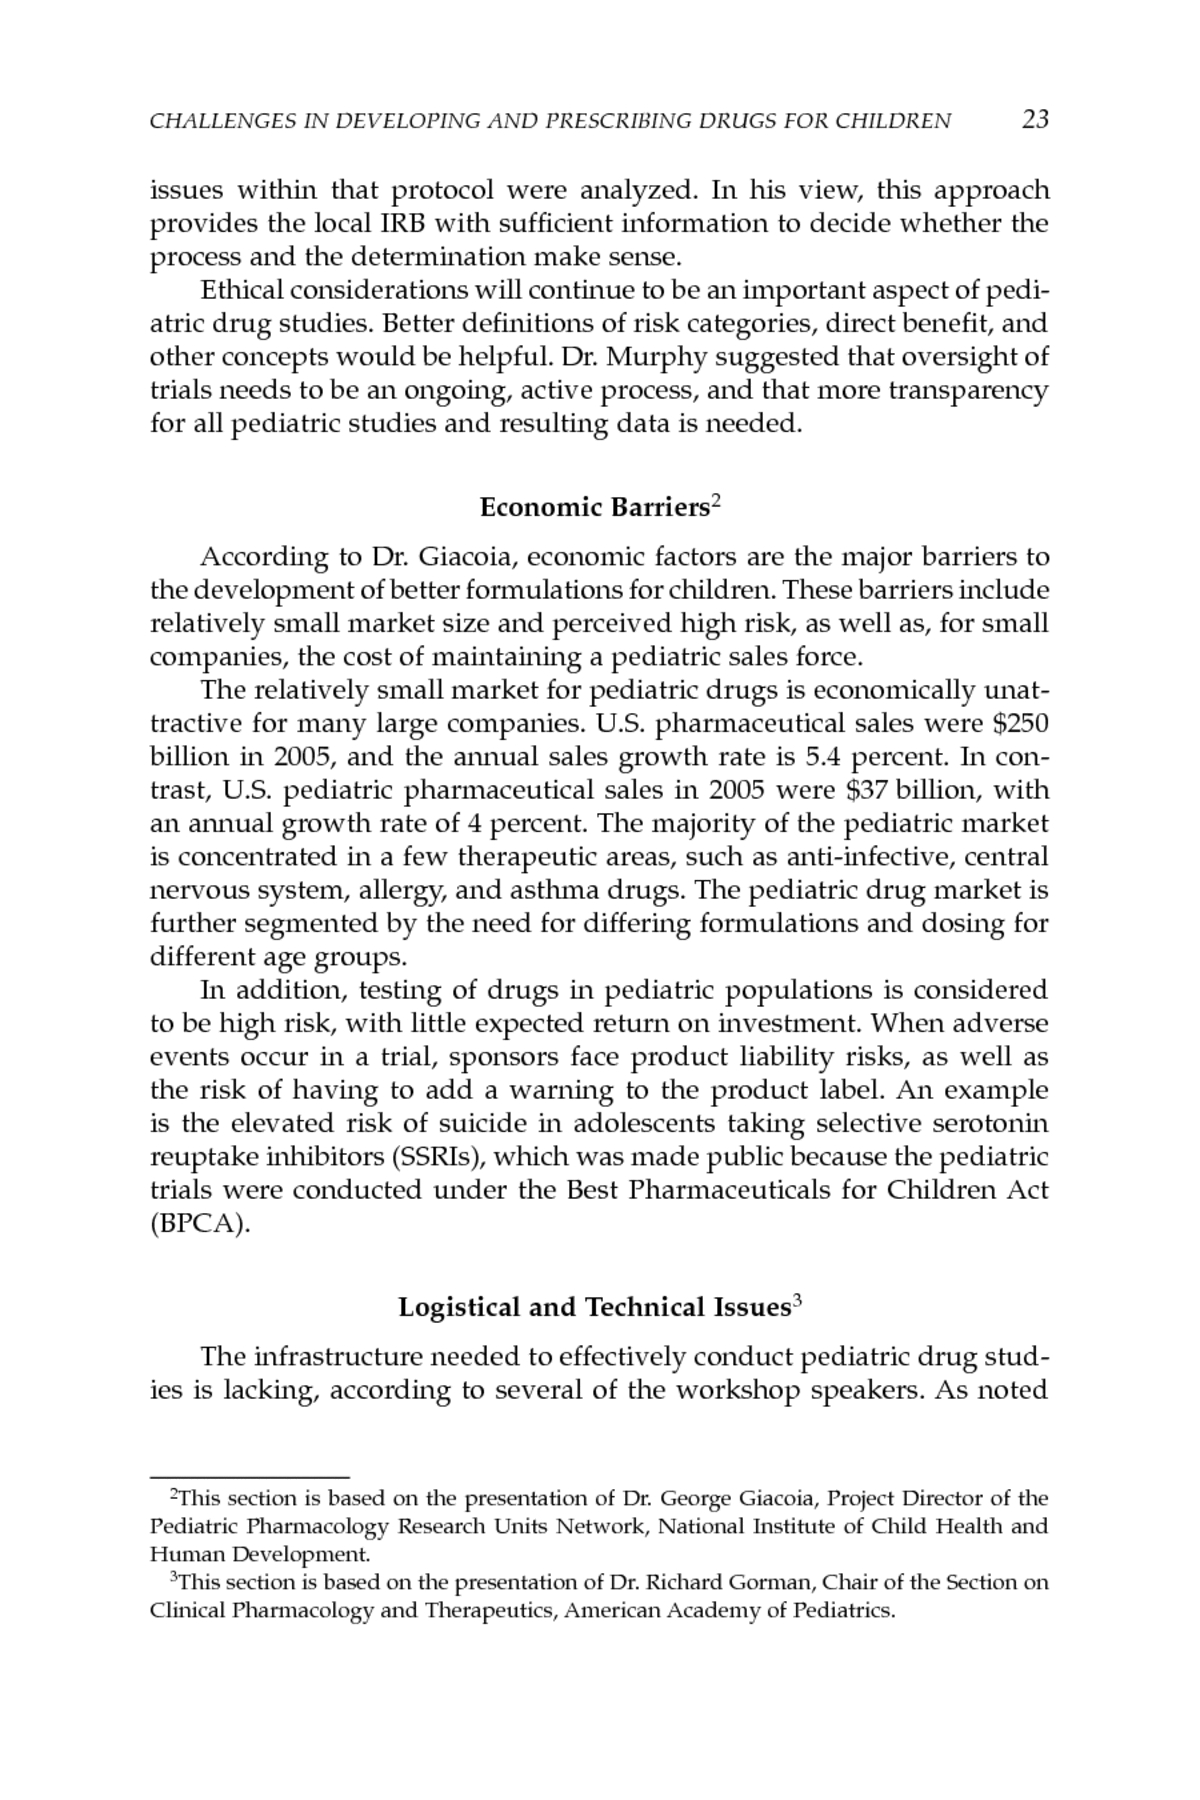 Professional Reference Letter Template - Professional Reference Letter for A Friend Image Collections